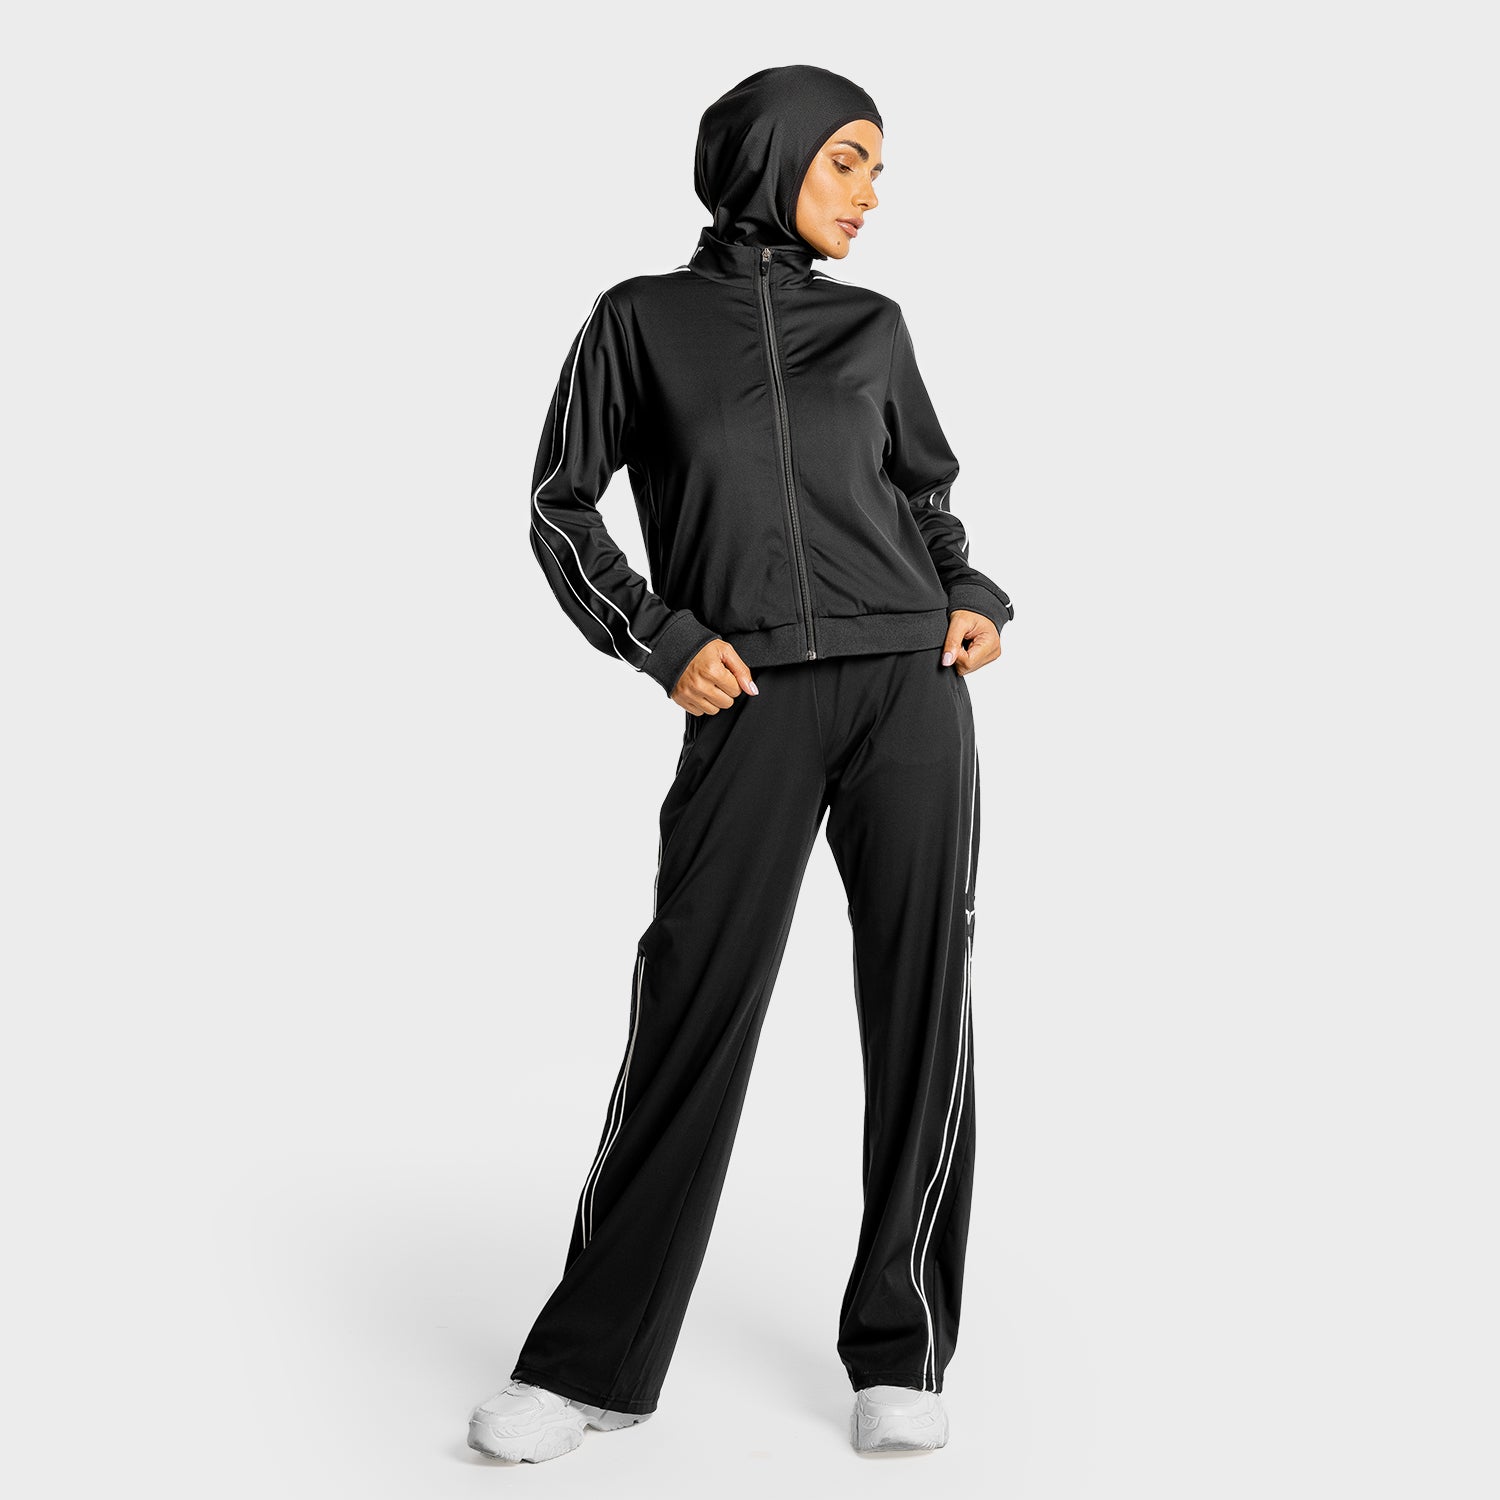 squatwolf-gym-hijab-for-women-noor-hijab-black-workout-clothes